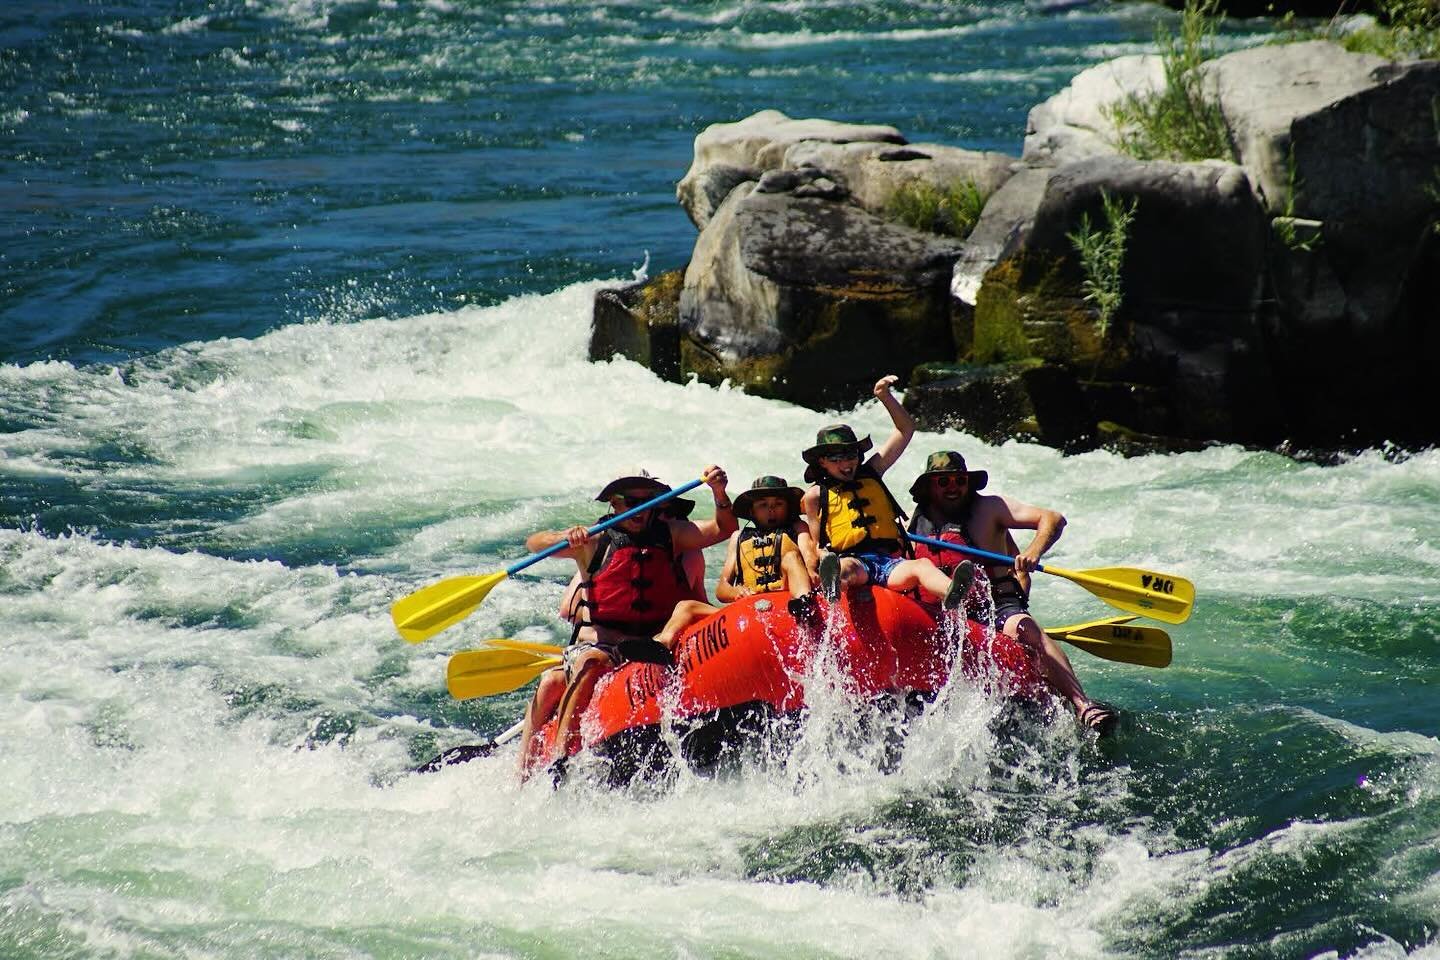 $55 FLASH SALE for trips booked between now and June 7! Join us on a half-day trip for just $55/person. Use the code SPRINGRAFTING at checkout. This sweet deal is valid weekdays through the whole month of June! Book before June 7, Raft before June 30